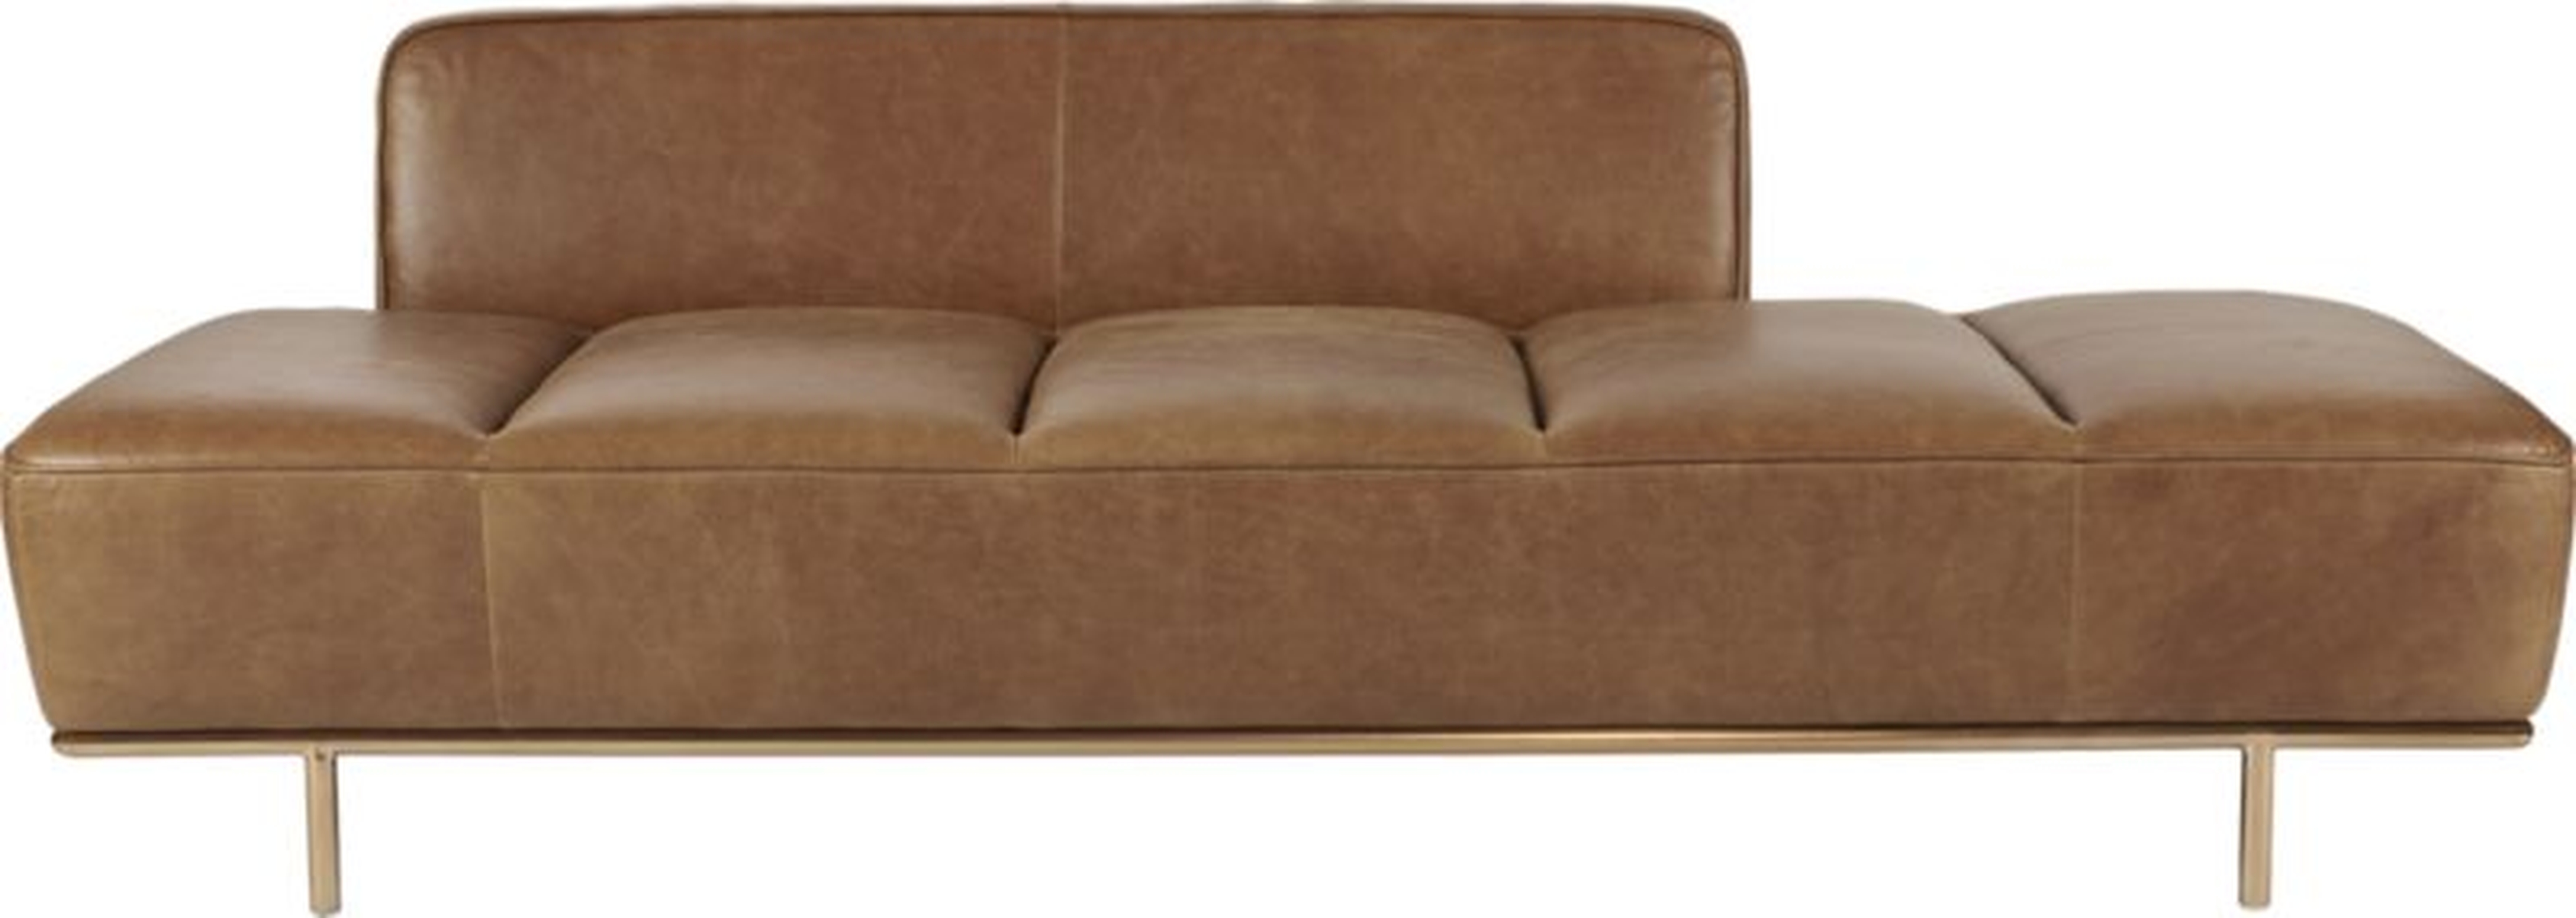 Lawndale leather daybed - CB2